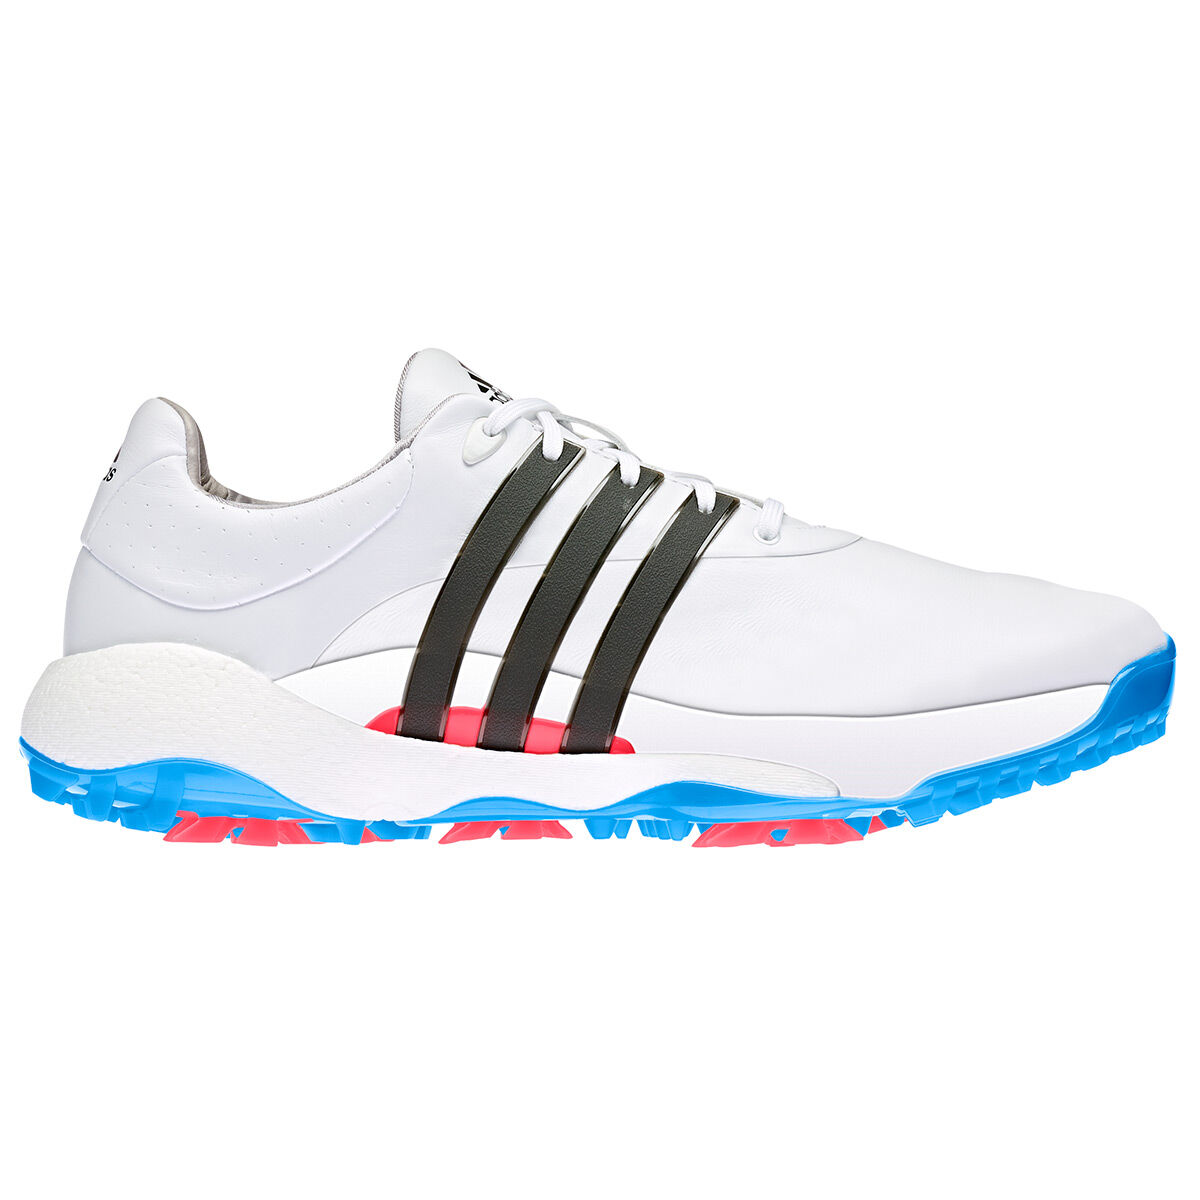 adidas Golf Tour360 Mens White, Black and Blue Waterproof 22 Regular Fit Golf Shoes, Size: 7 | American Golf - Father's Day Gift von adidas Golf